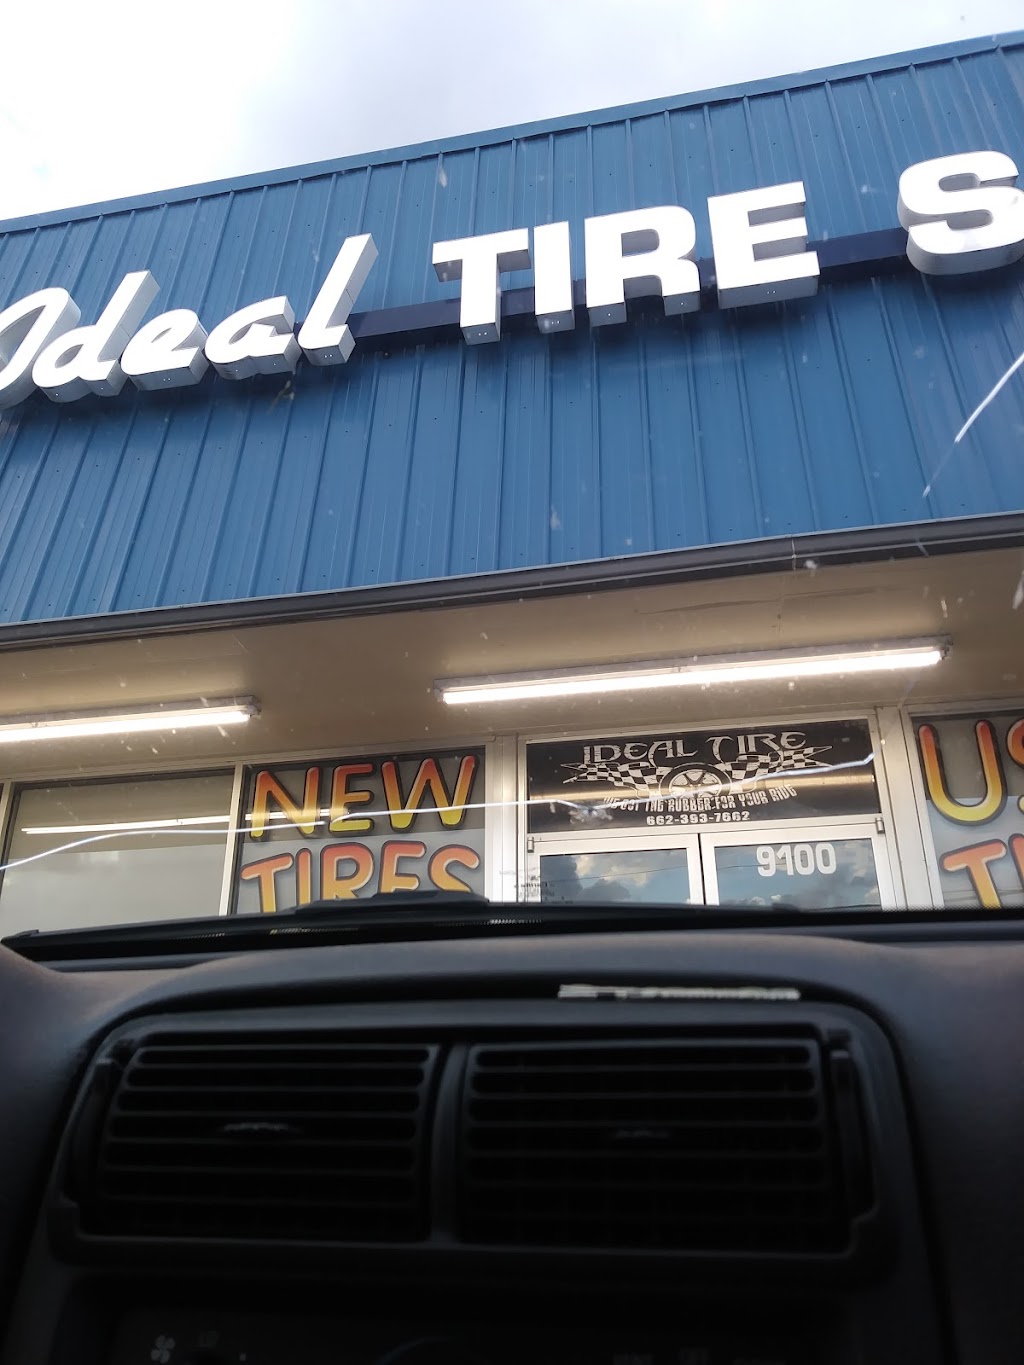 Ideal Tire Sales | 9100 Old Hwy 51 N, Southaven, MS 38671, USA | Phone: (662) 393-7662